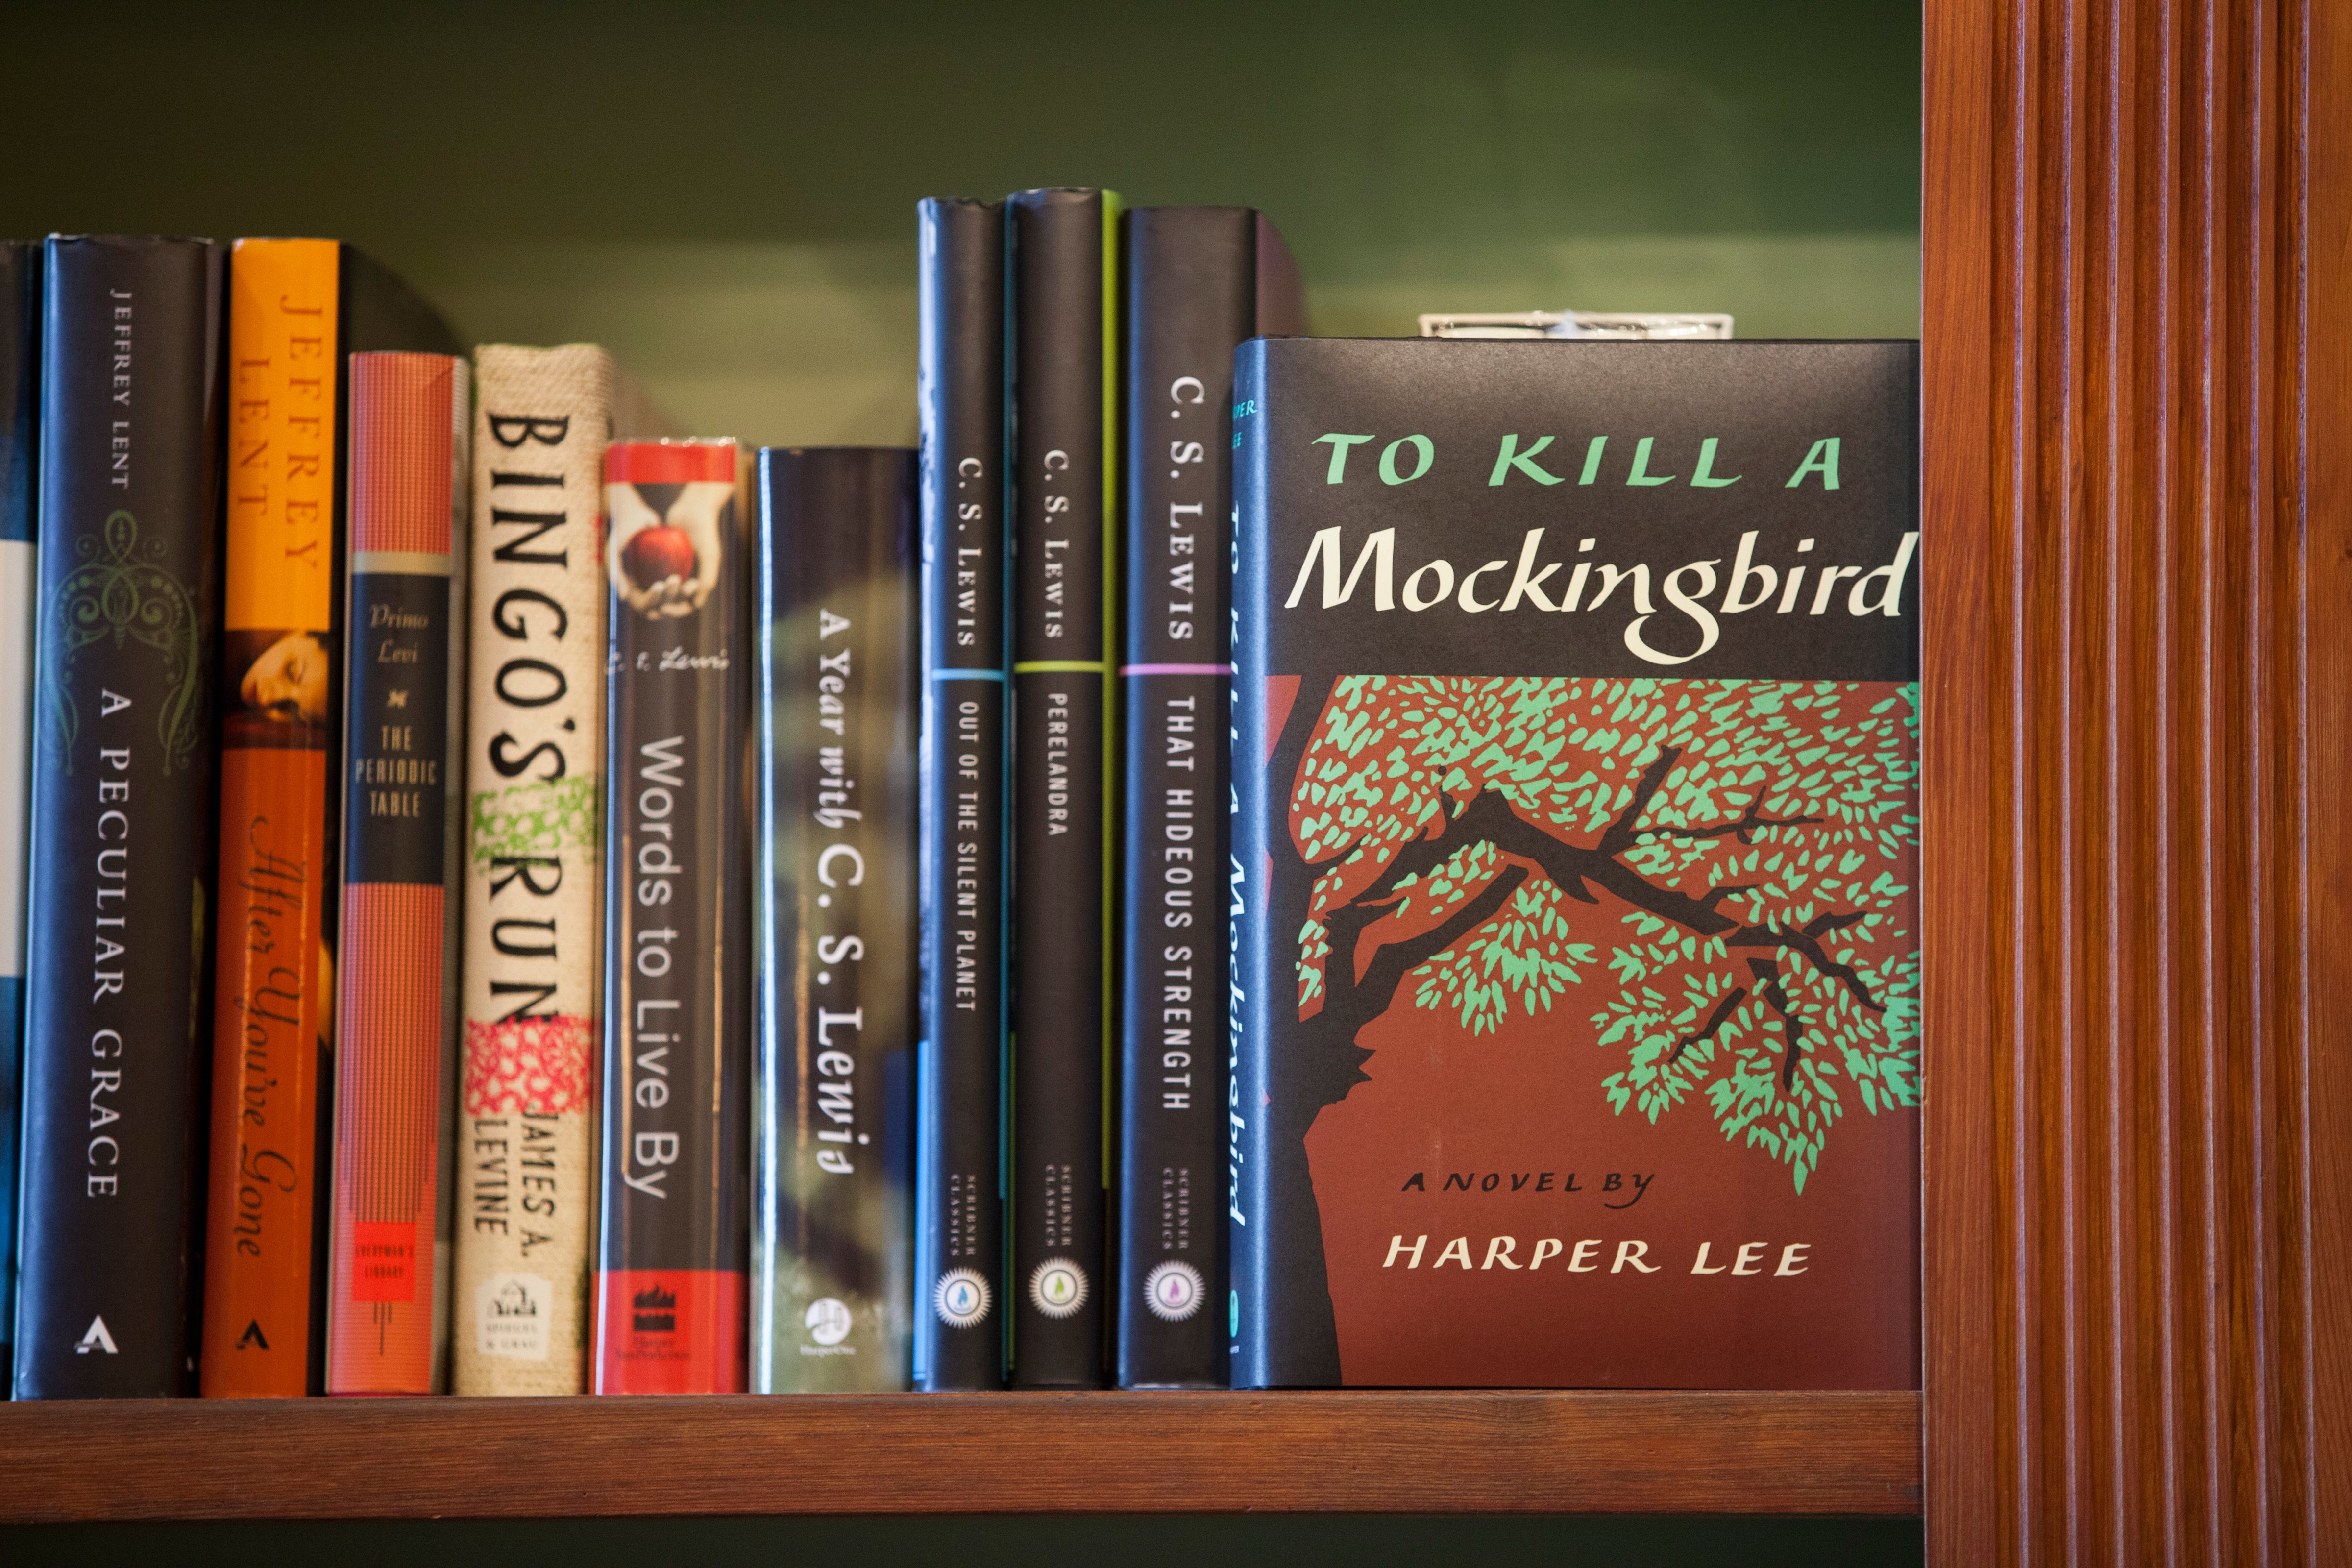 A new printing of the book 'To Kill a Mockingbird,' by author Harper Lee, is on display at Faulkner House Books in New Orleans, Louisiana on May 28, 2015. (Melanie Stetson Freeman—The Christian Science Monitor/Getty Images)